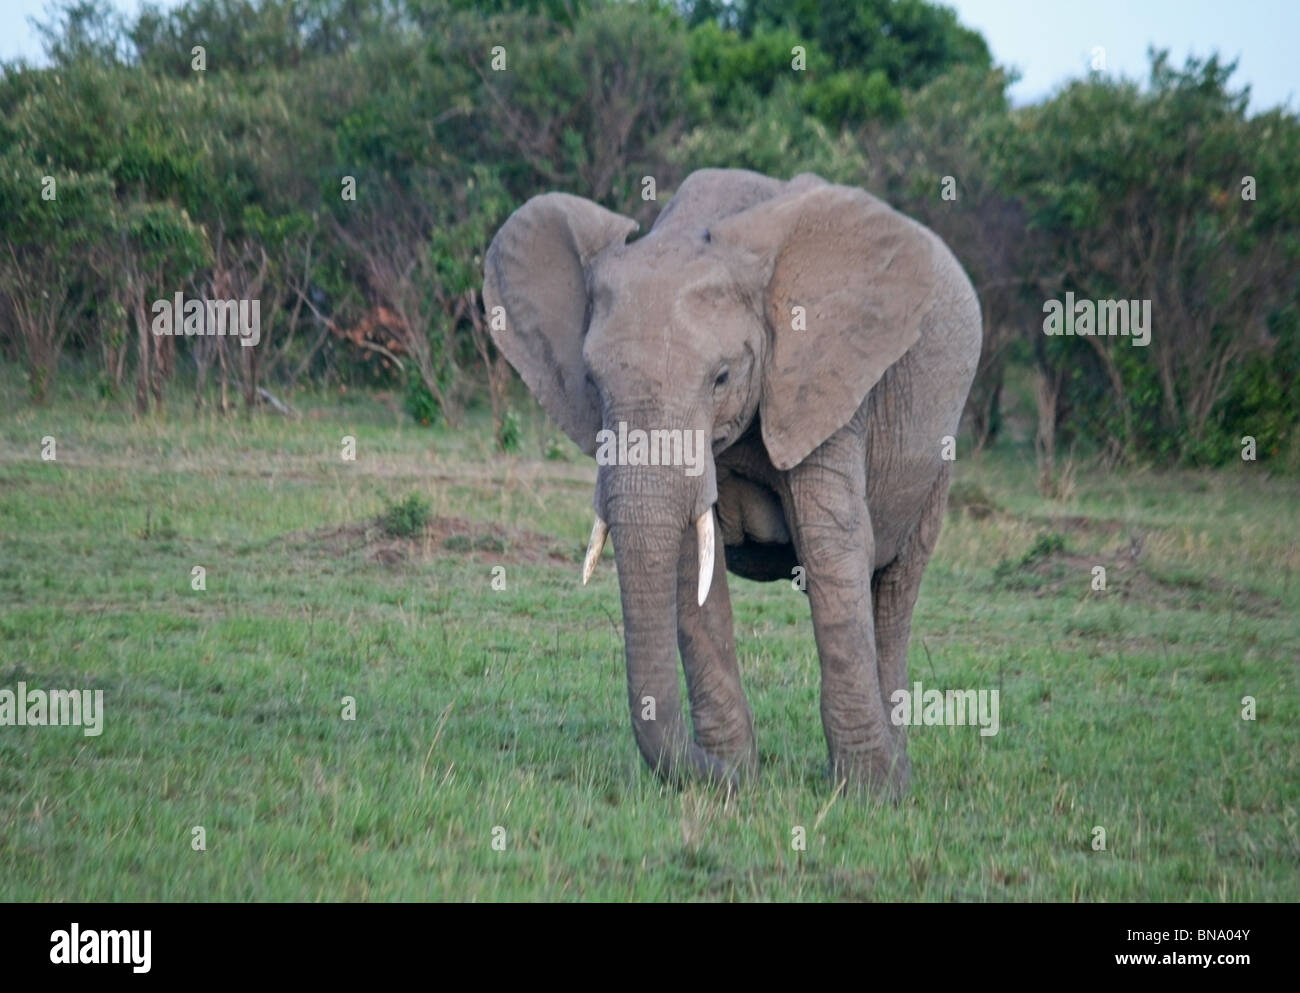 African Elephant standing in the grasslands of Masai Mara National Reserve, Kenya East Africa Stock Photo